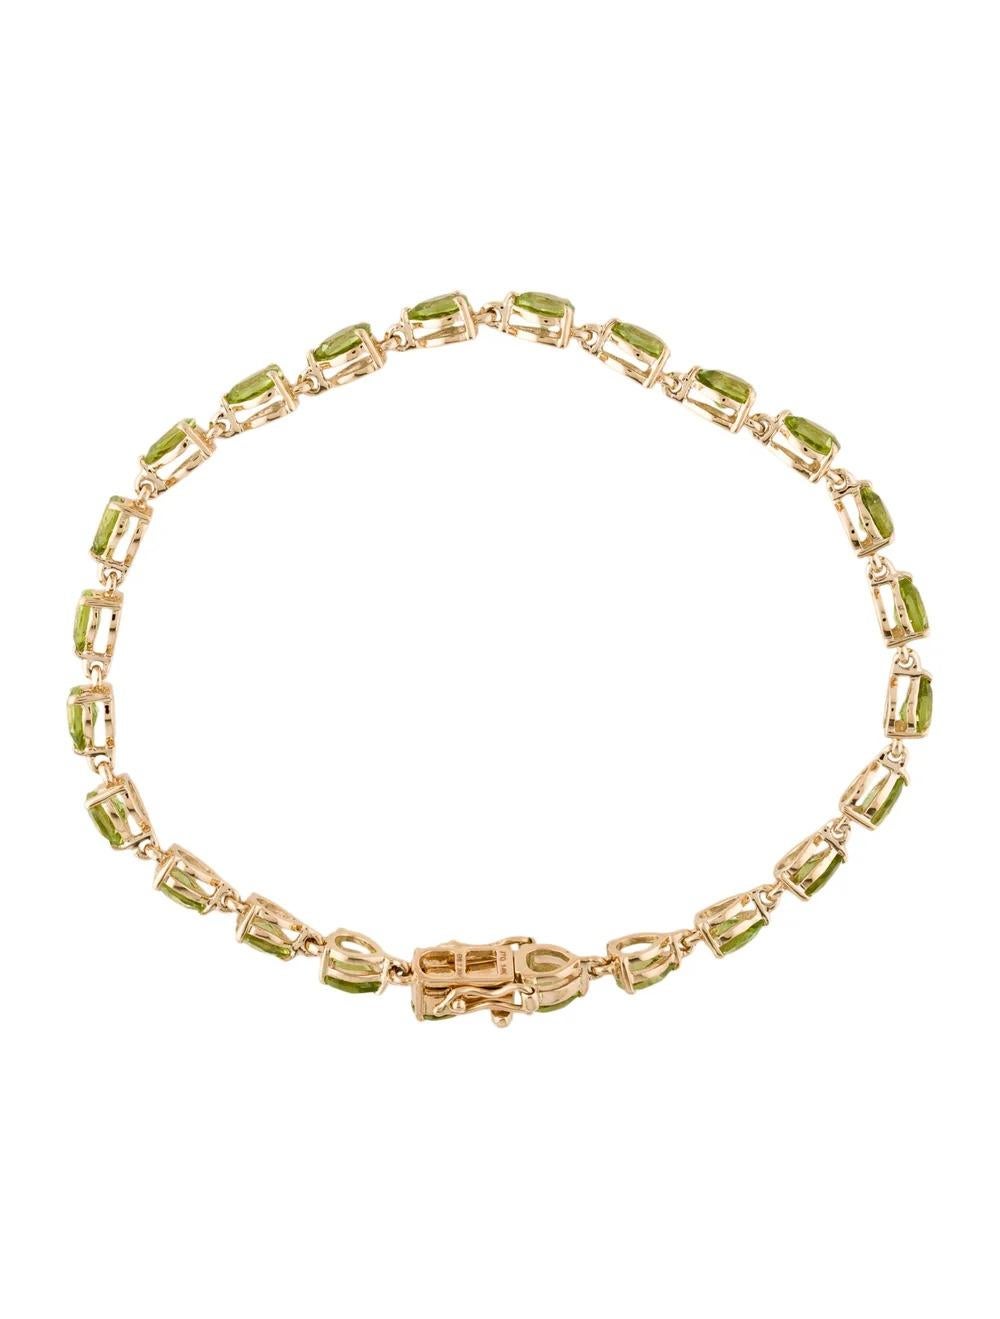 Vintage 14K Peridot Link Bracelet  6.96ctw - Estate Jewelry - Green Gemstone In New Condition For Sale In Holtsville, NY